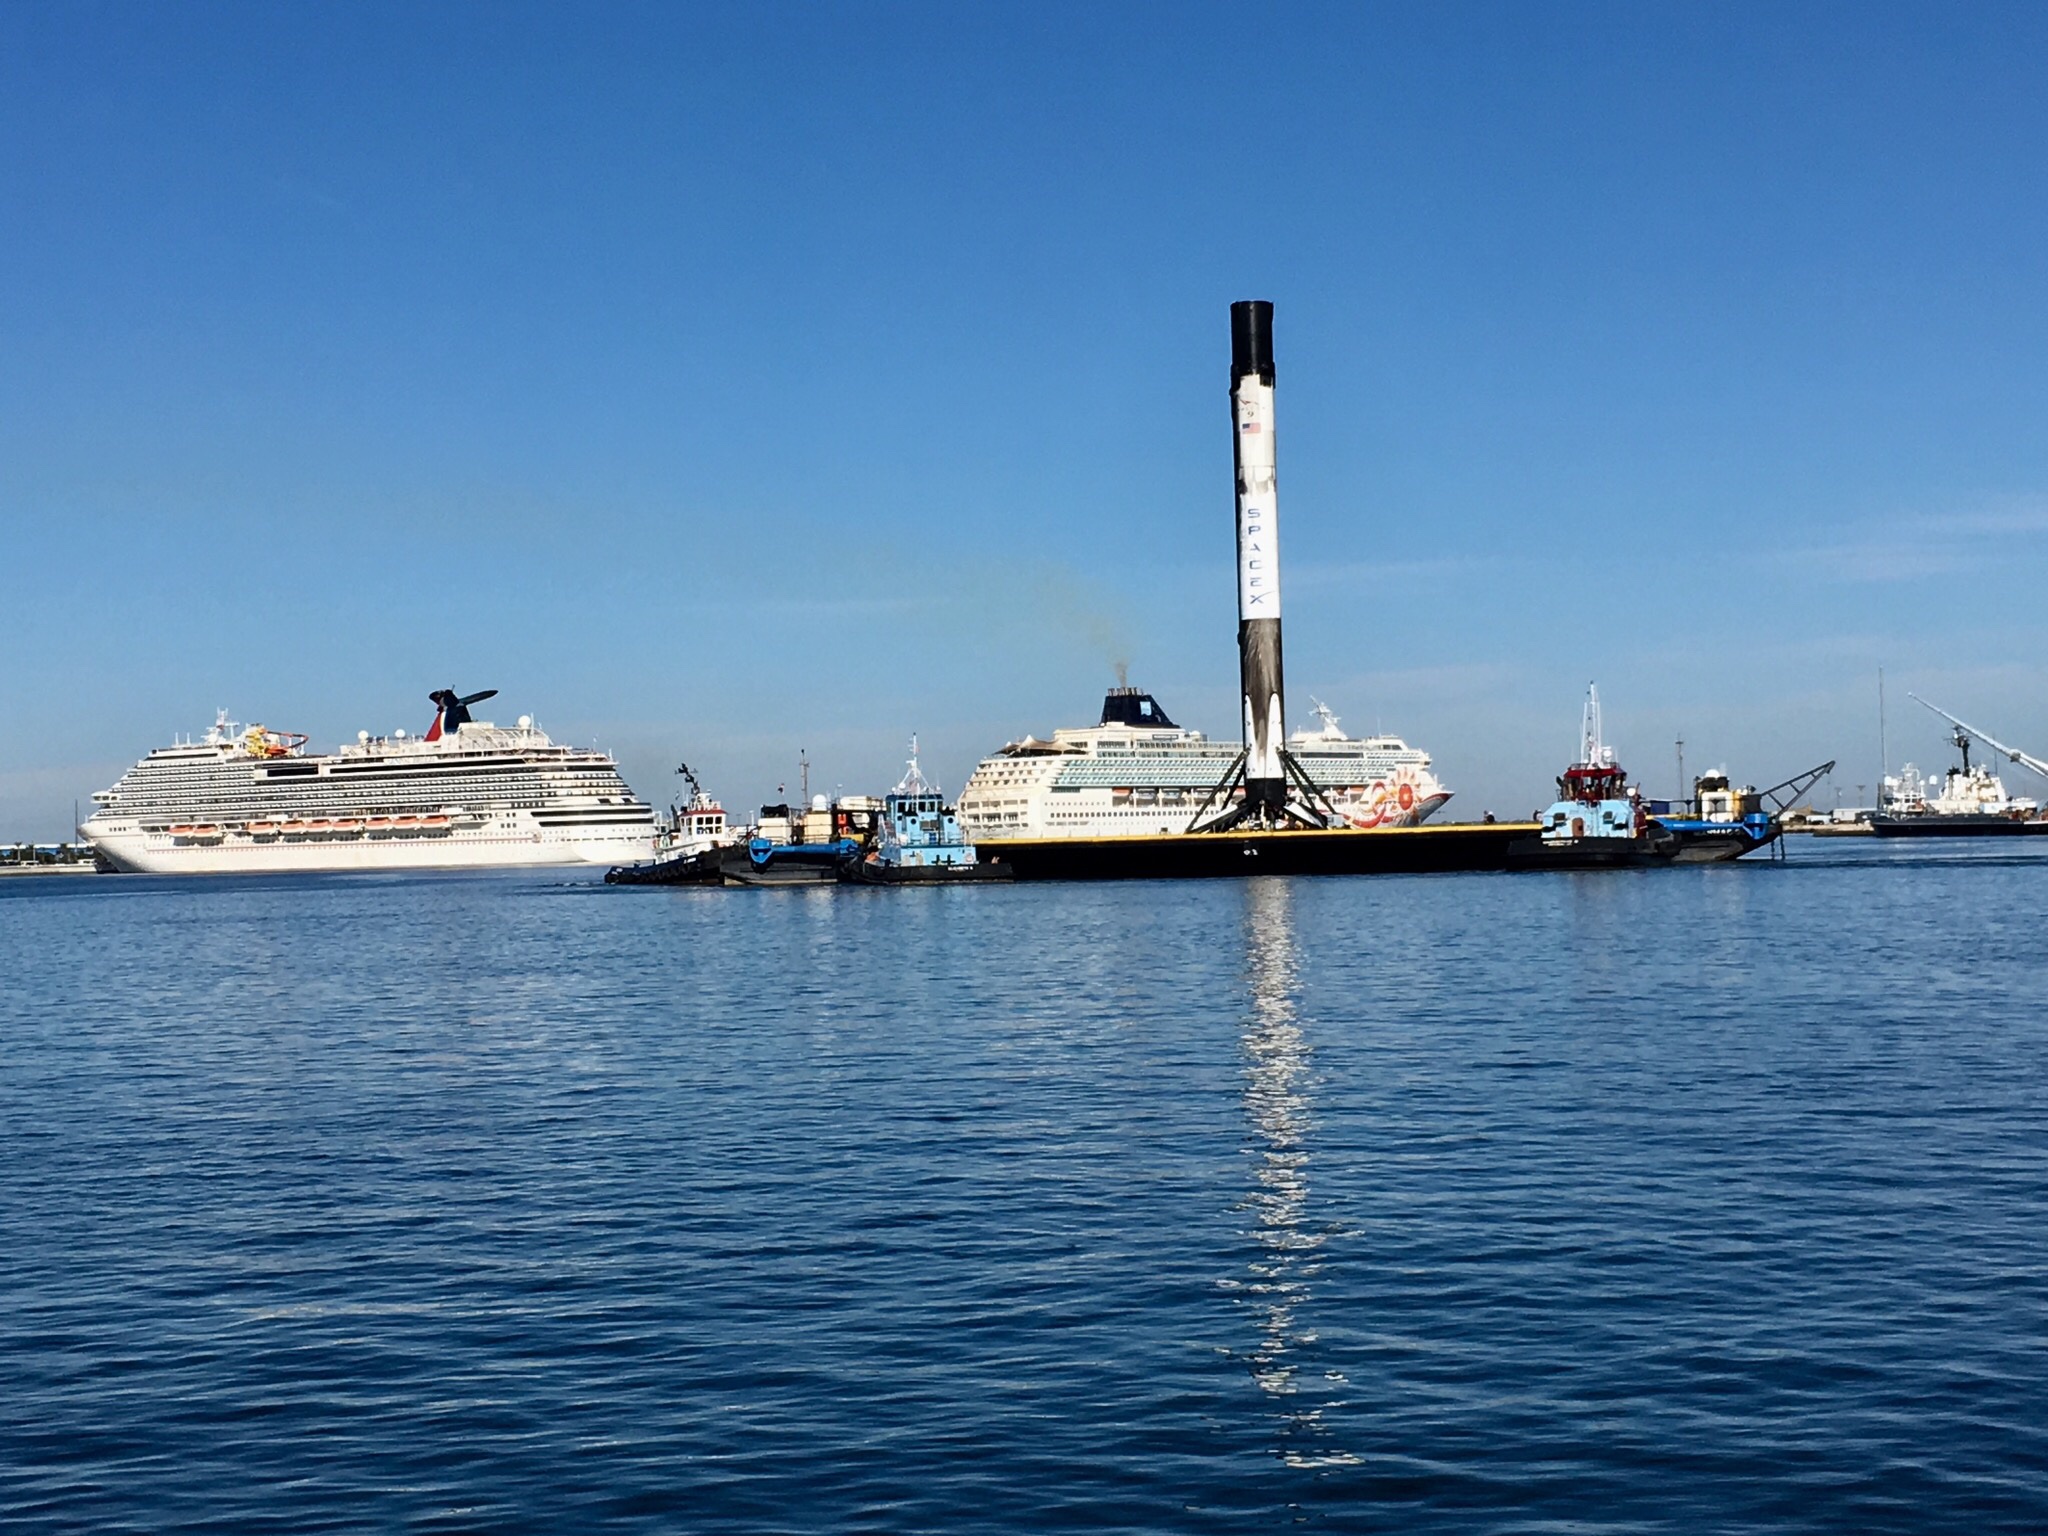 SpaceX 1st Stage Booster from Cargo Dragon Launch Sails into Port Canaveral: Photos